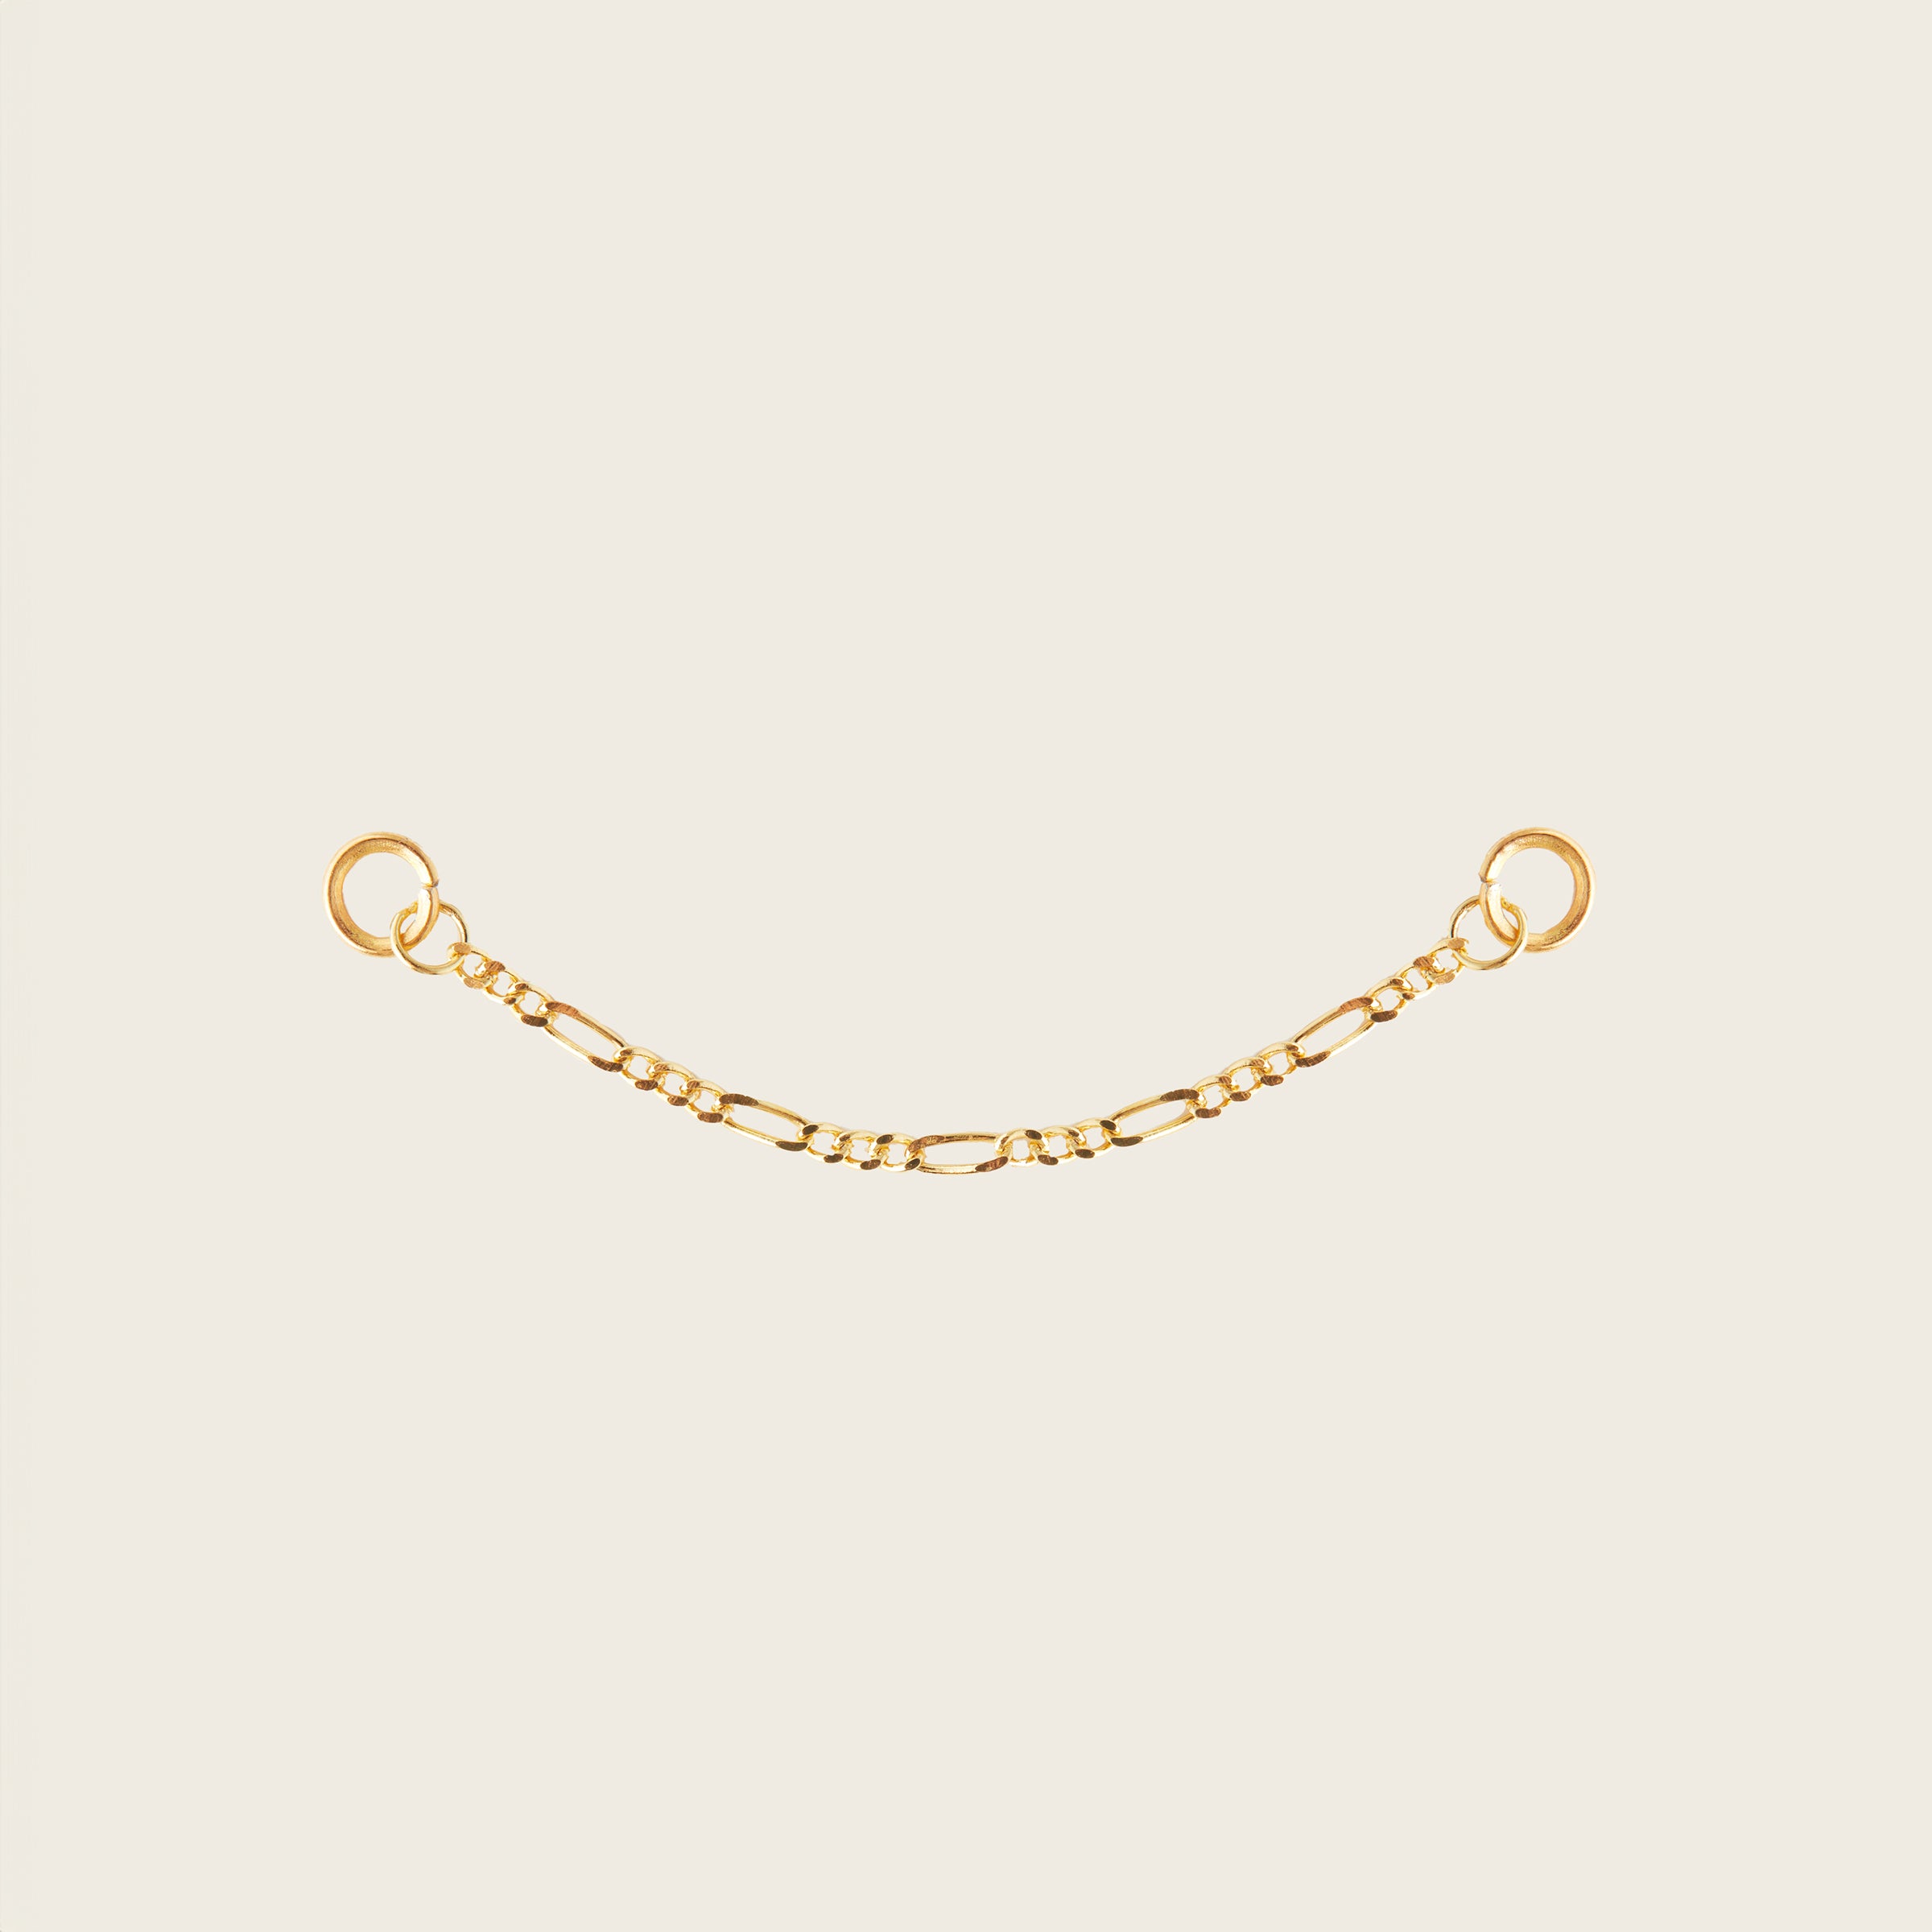 Image of the Single Figaro Hoop Chain are made with high-quality materials, including 18K gold plating over 925 Sterling Silver. These charms are both non-tarnish and water resistant. The perfect combination of style and durability.